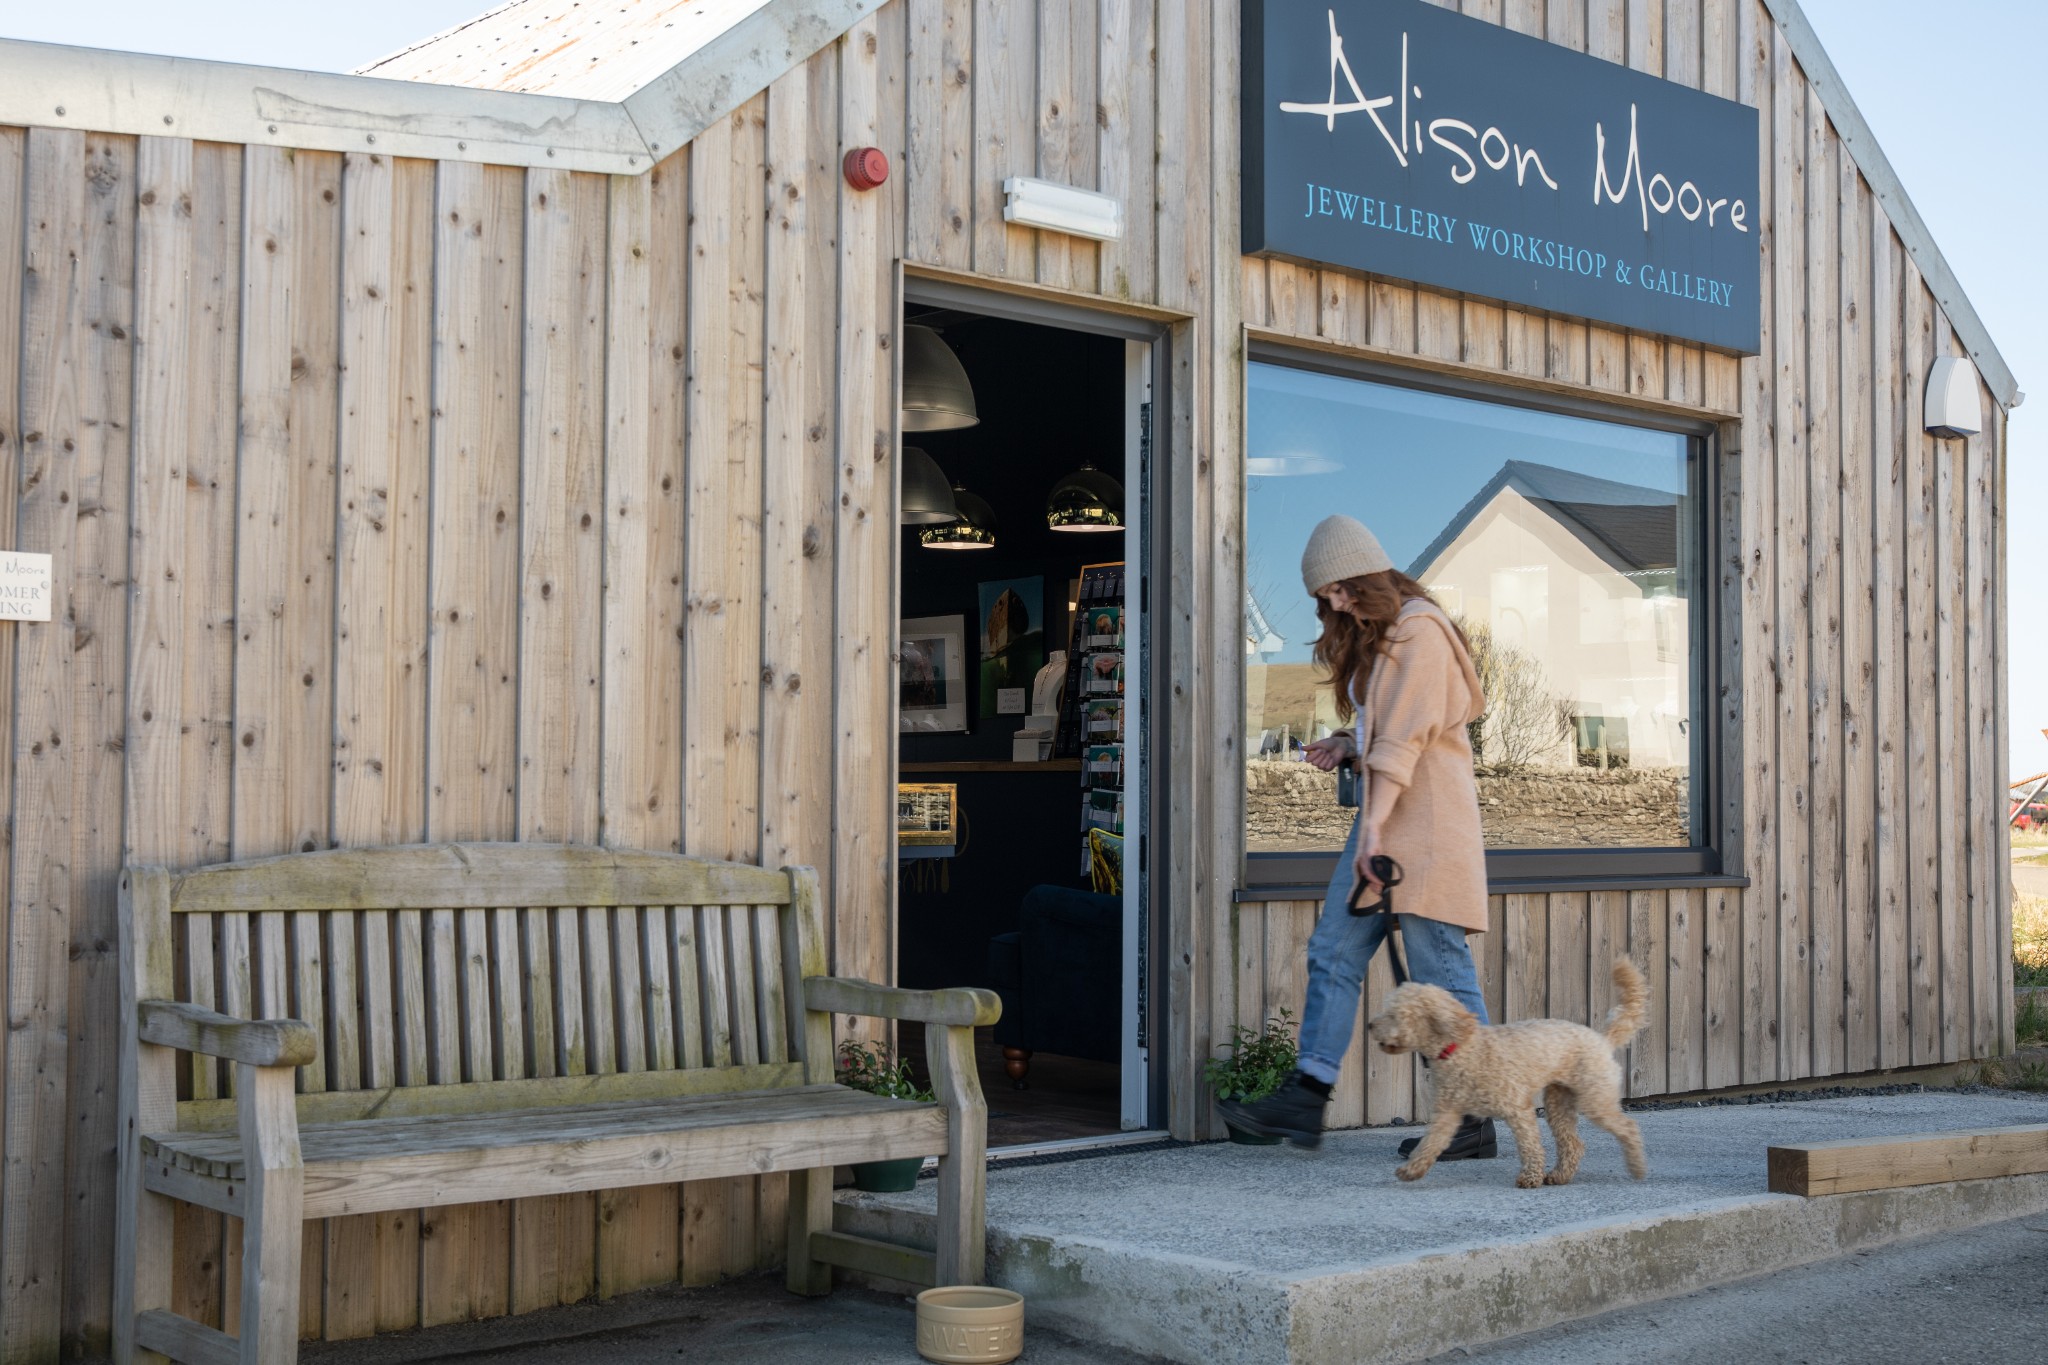 Alison Moore Designs is just one of Orkney's dog-friendly creative businesses